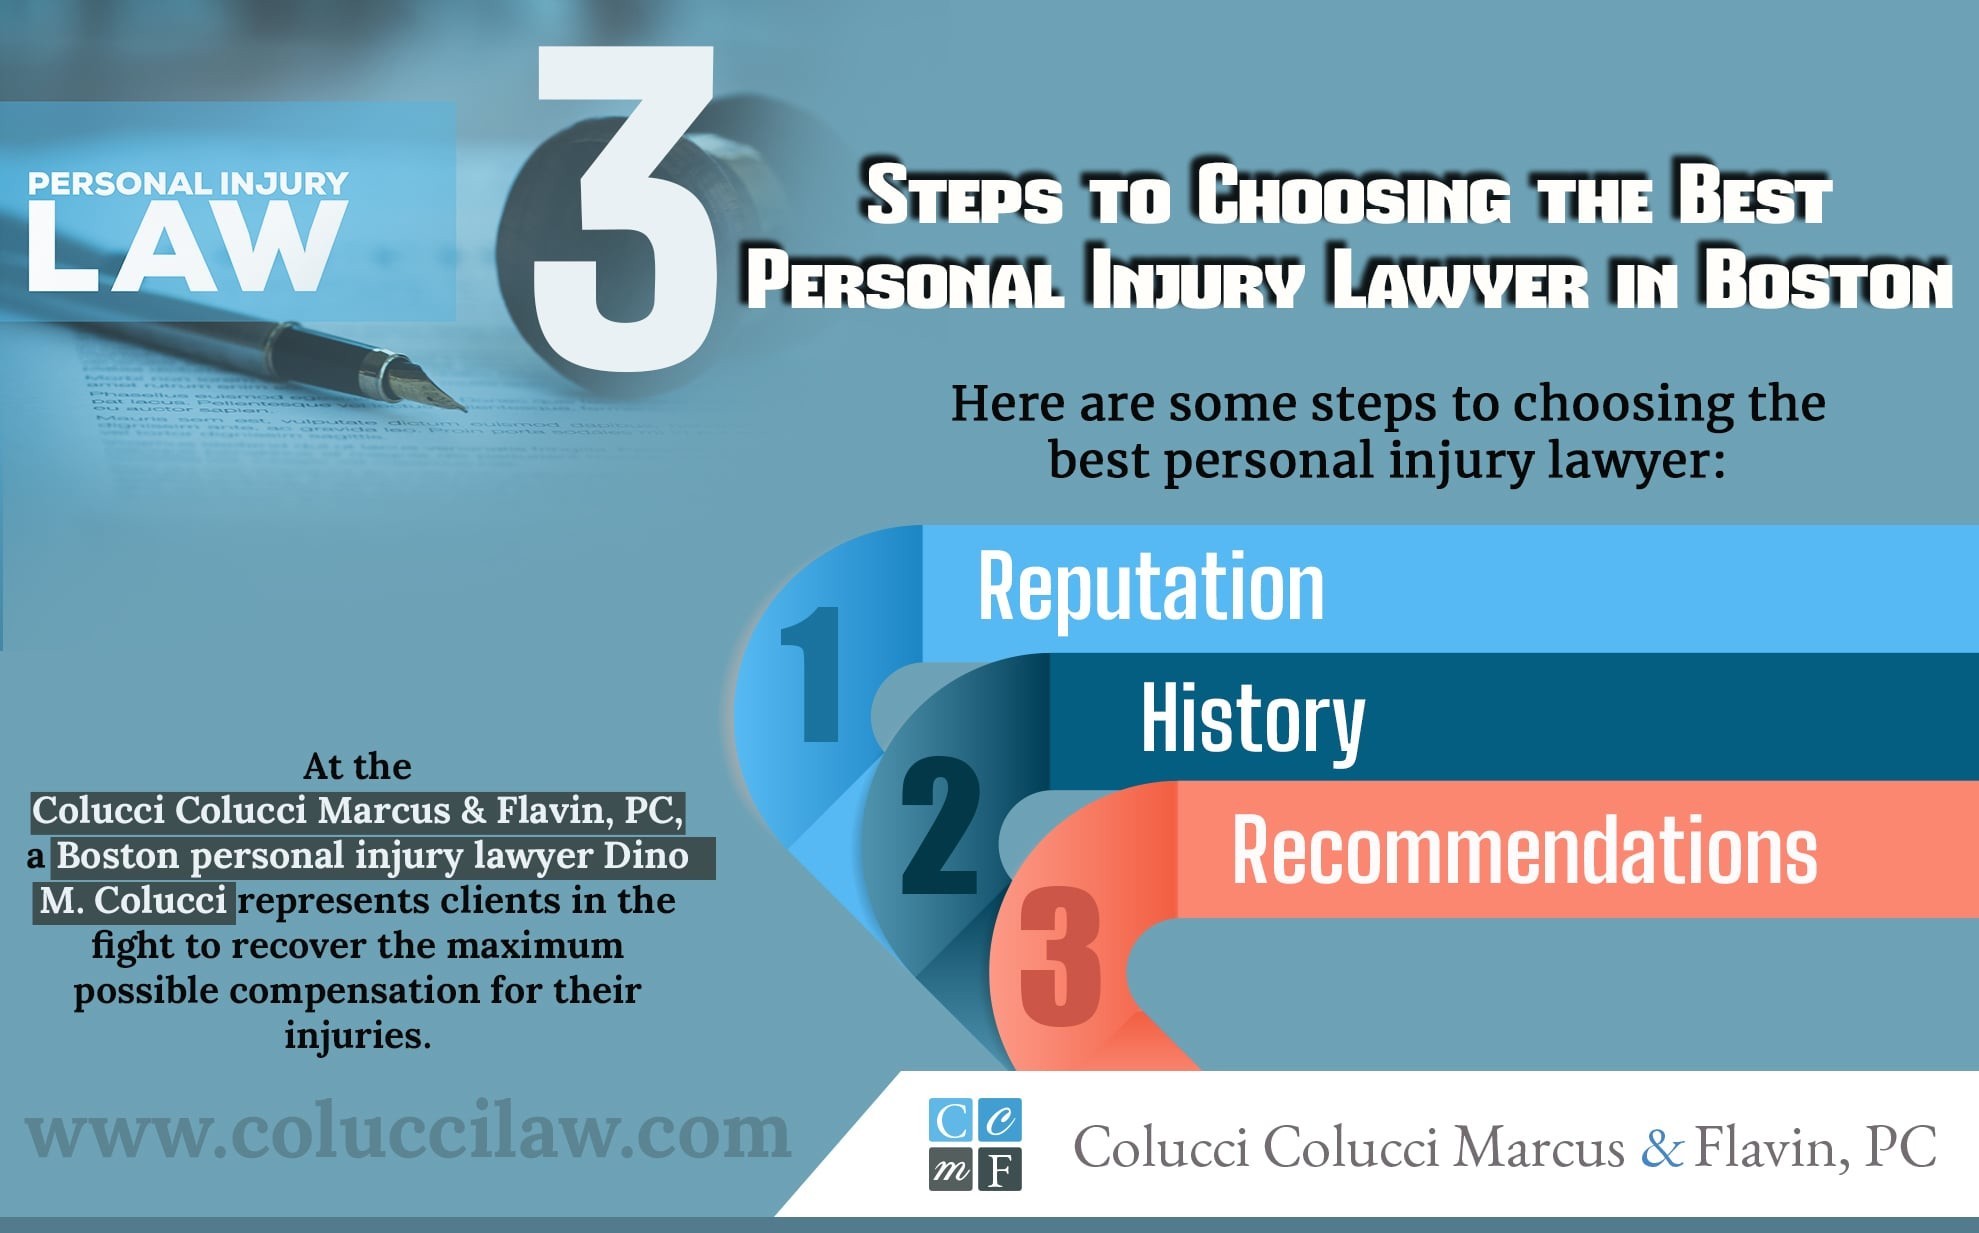 Some Steps to Choosing the Best Personal Injury Lawyer in Boston